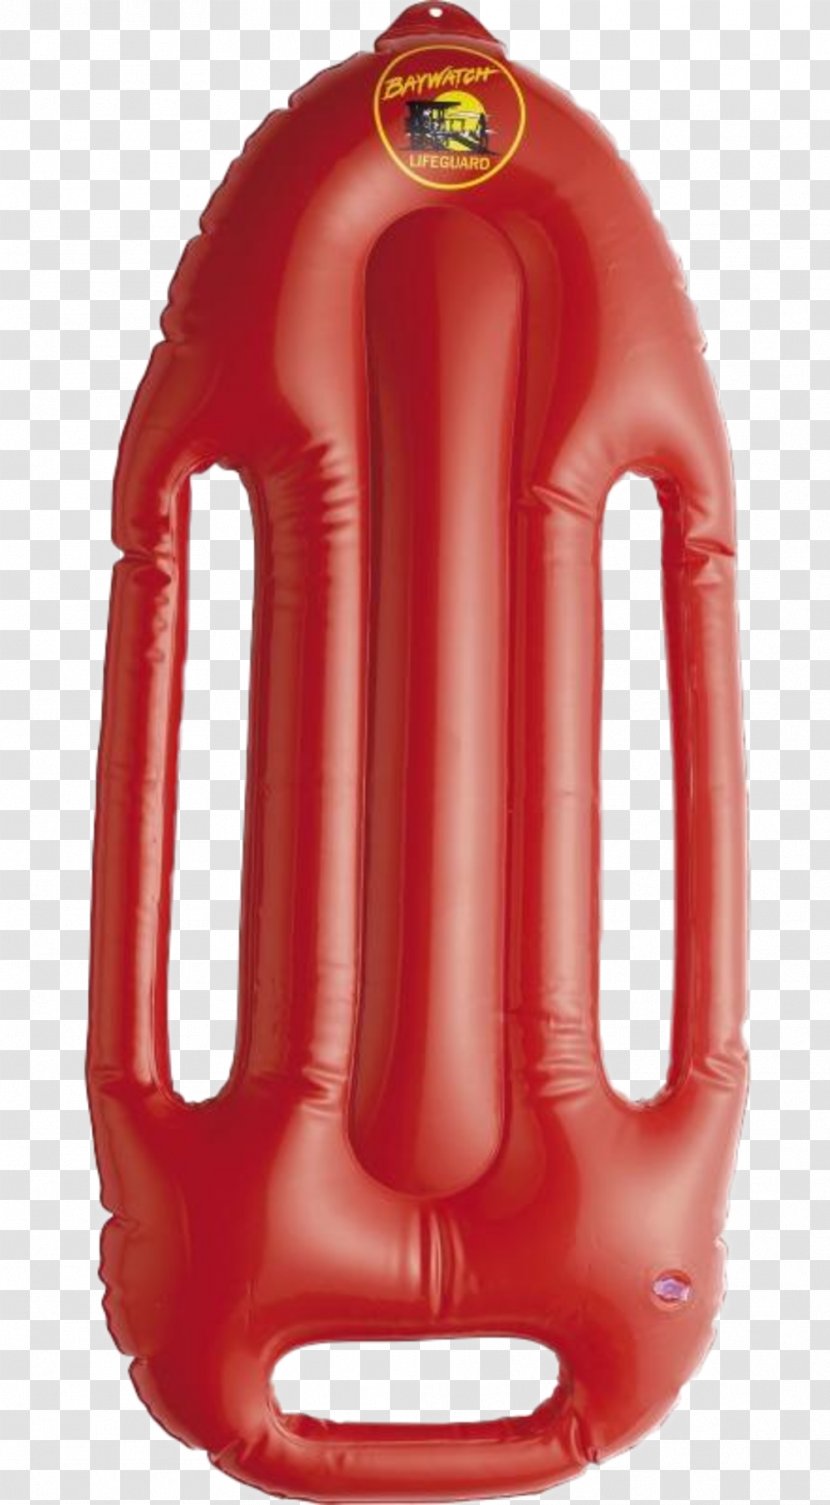 Lifeguard Inflatable Costume Party Rescue Buoy - Lifesaving - Baywatch Transparent PNG